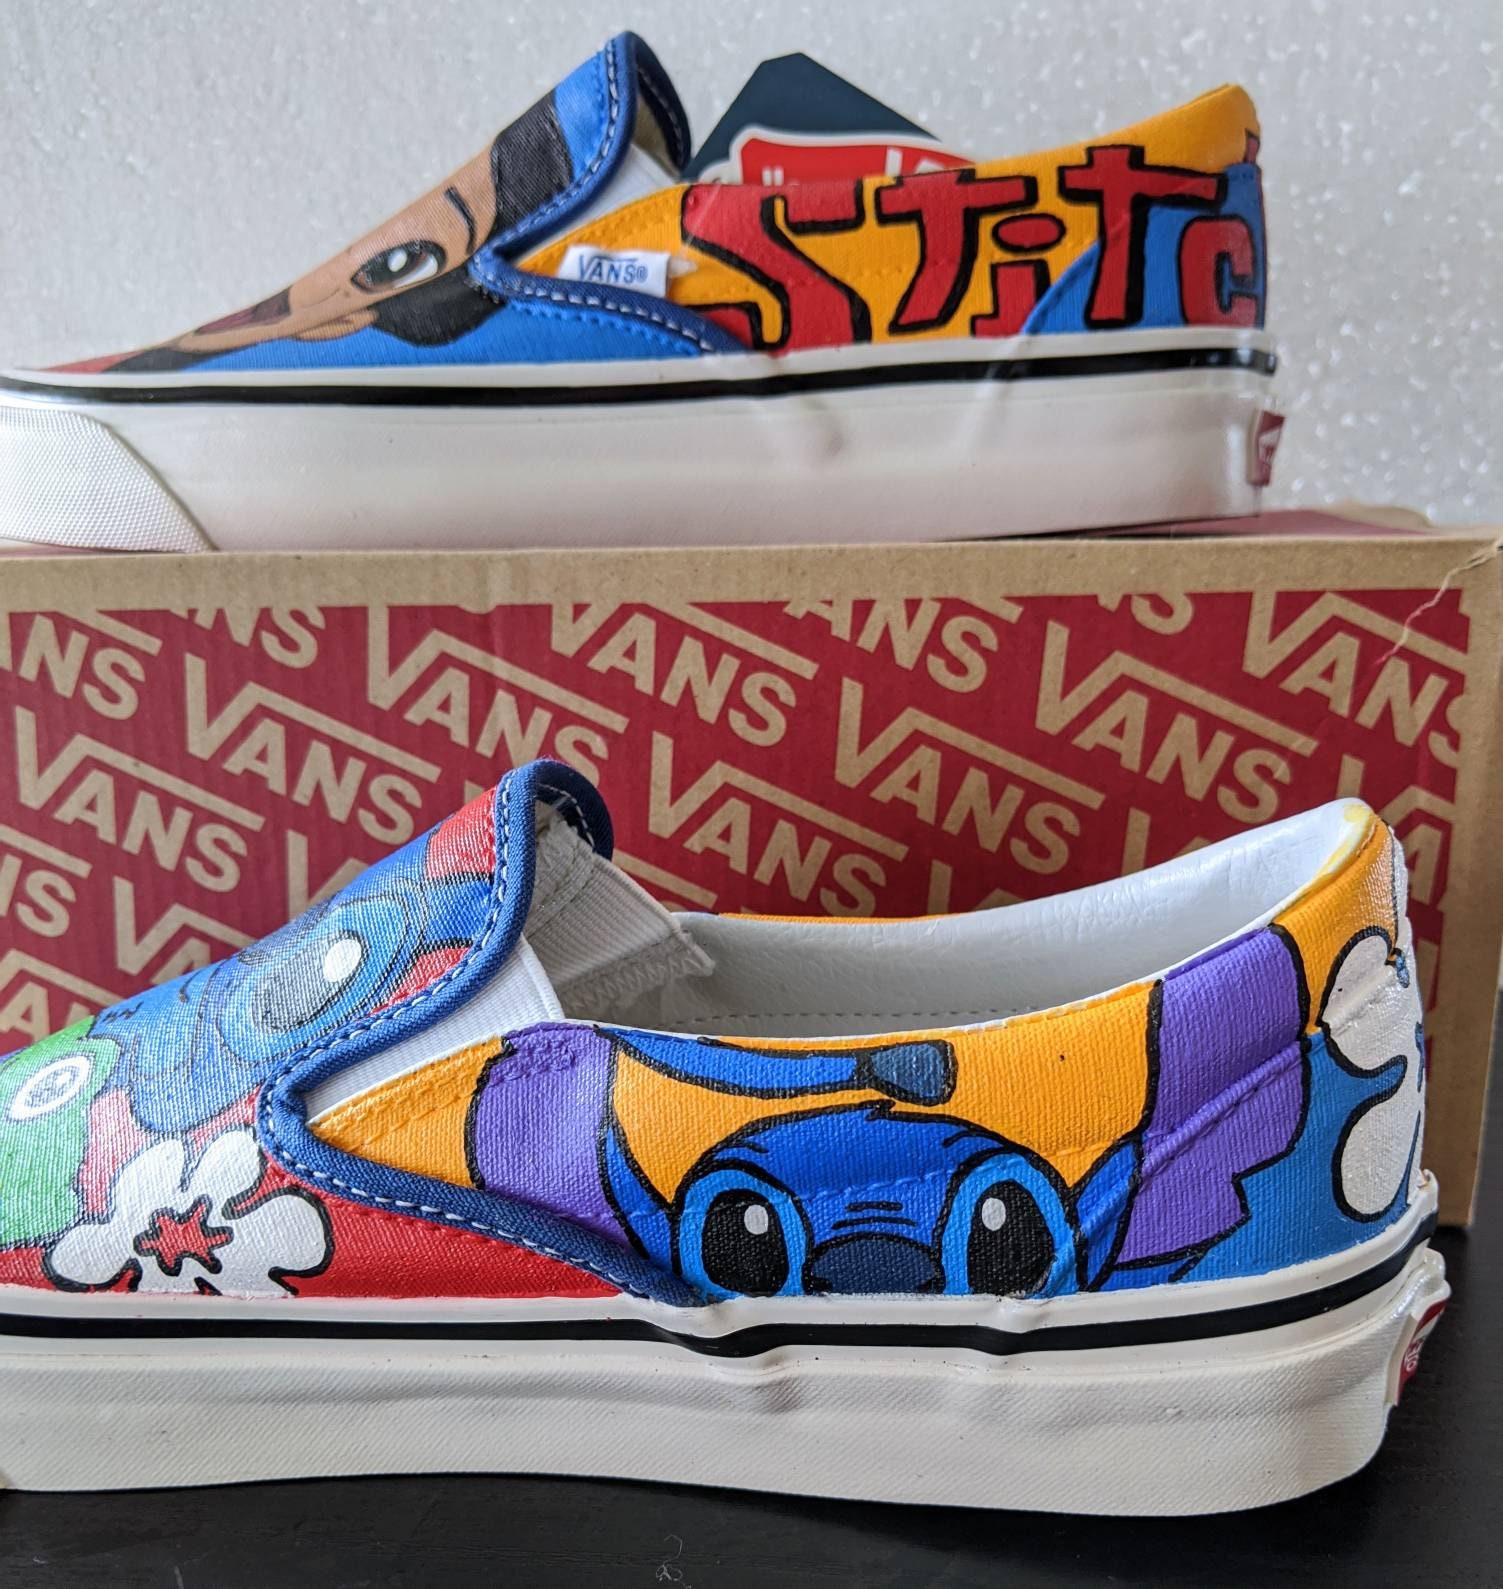 Custom Hand Painted Disney Lilo and Stitch Canvas Shoes | Etsy